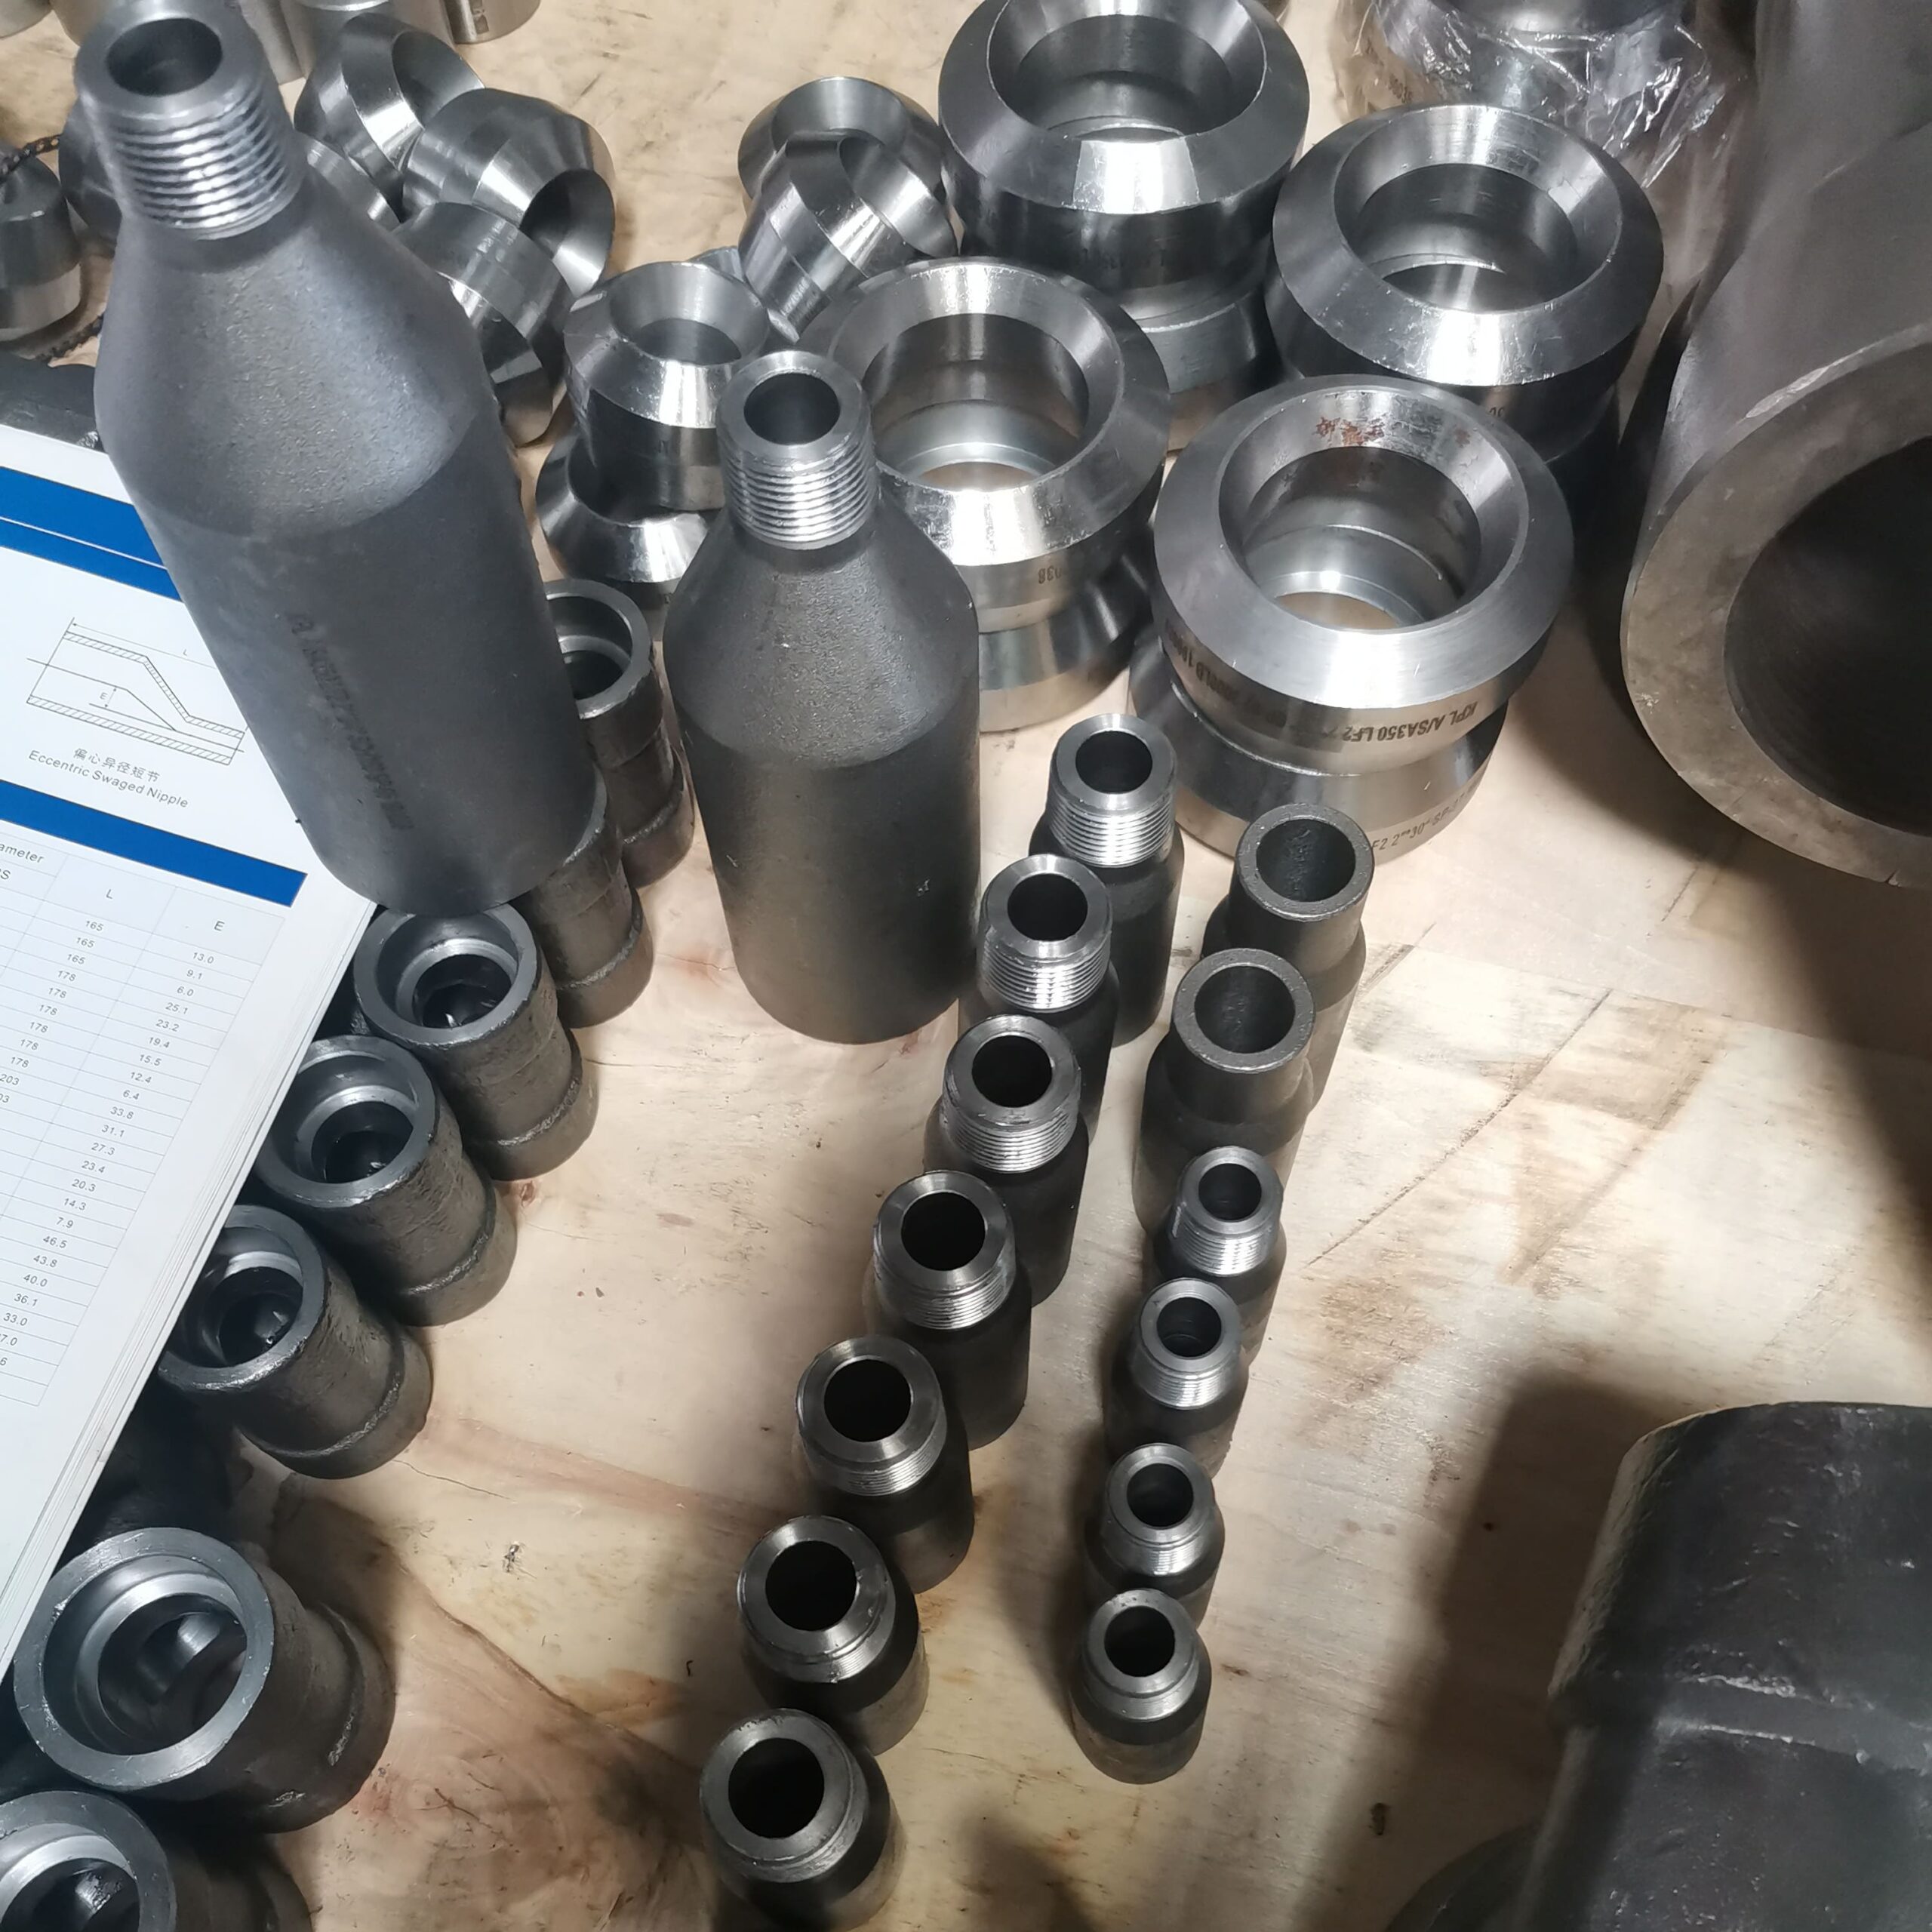 Concentric Swage Nipple Threaded Pipe Fittings